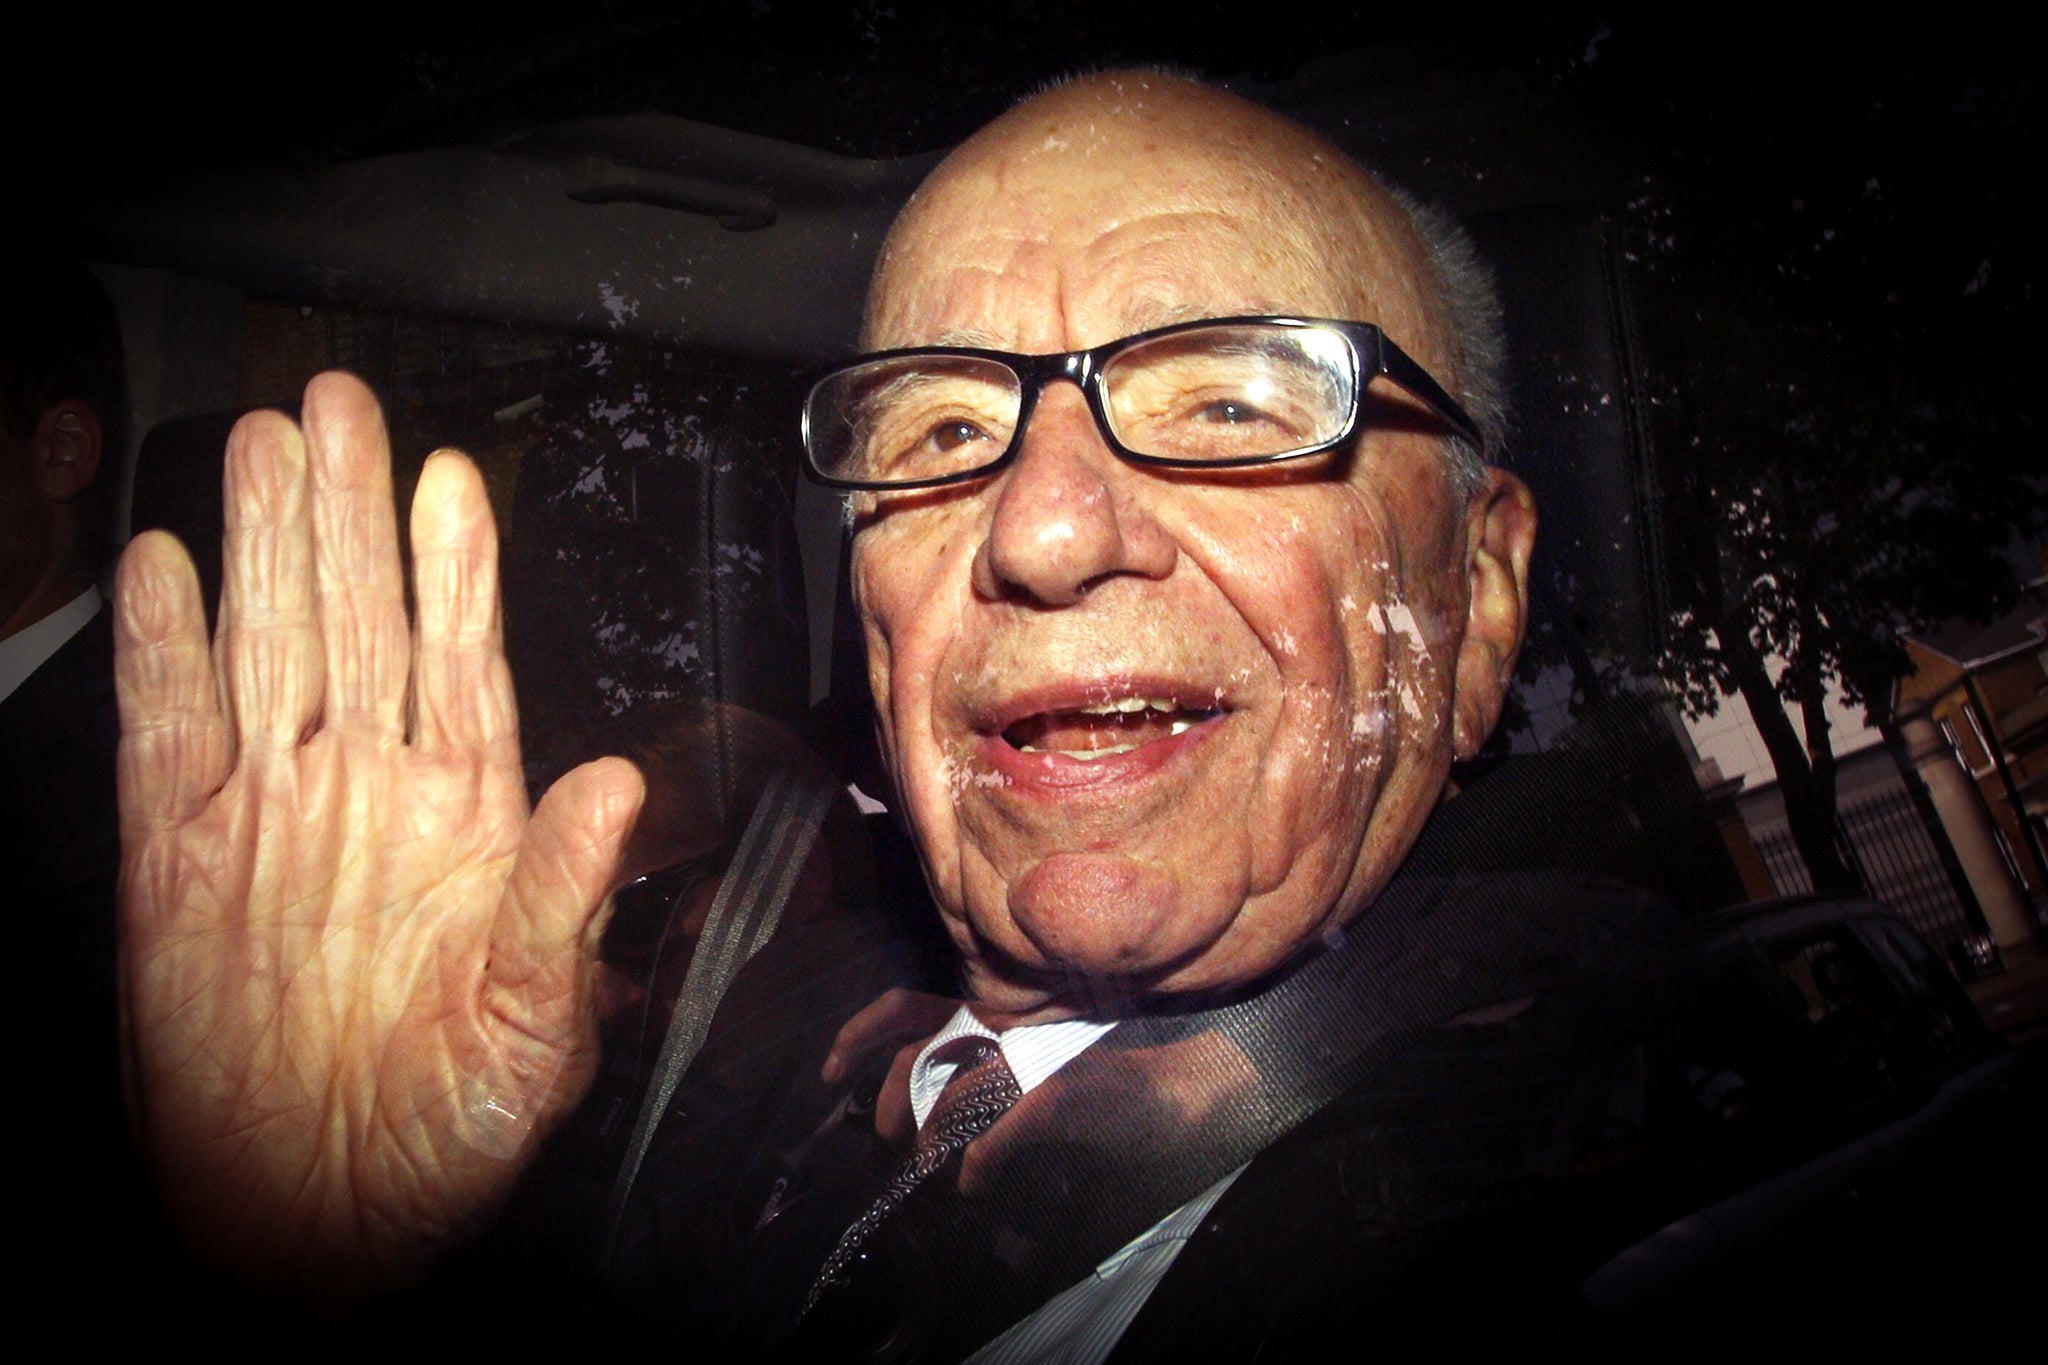 Lachlan Murdoch takes on the job following his father Rupert stepping down